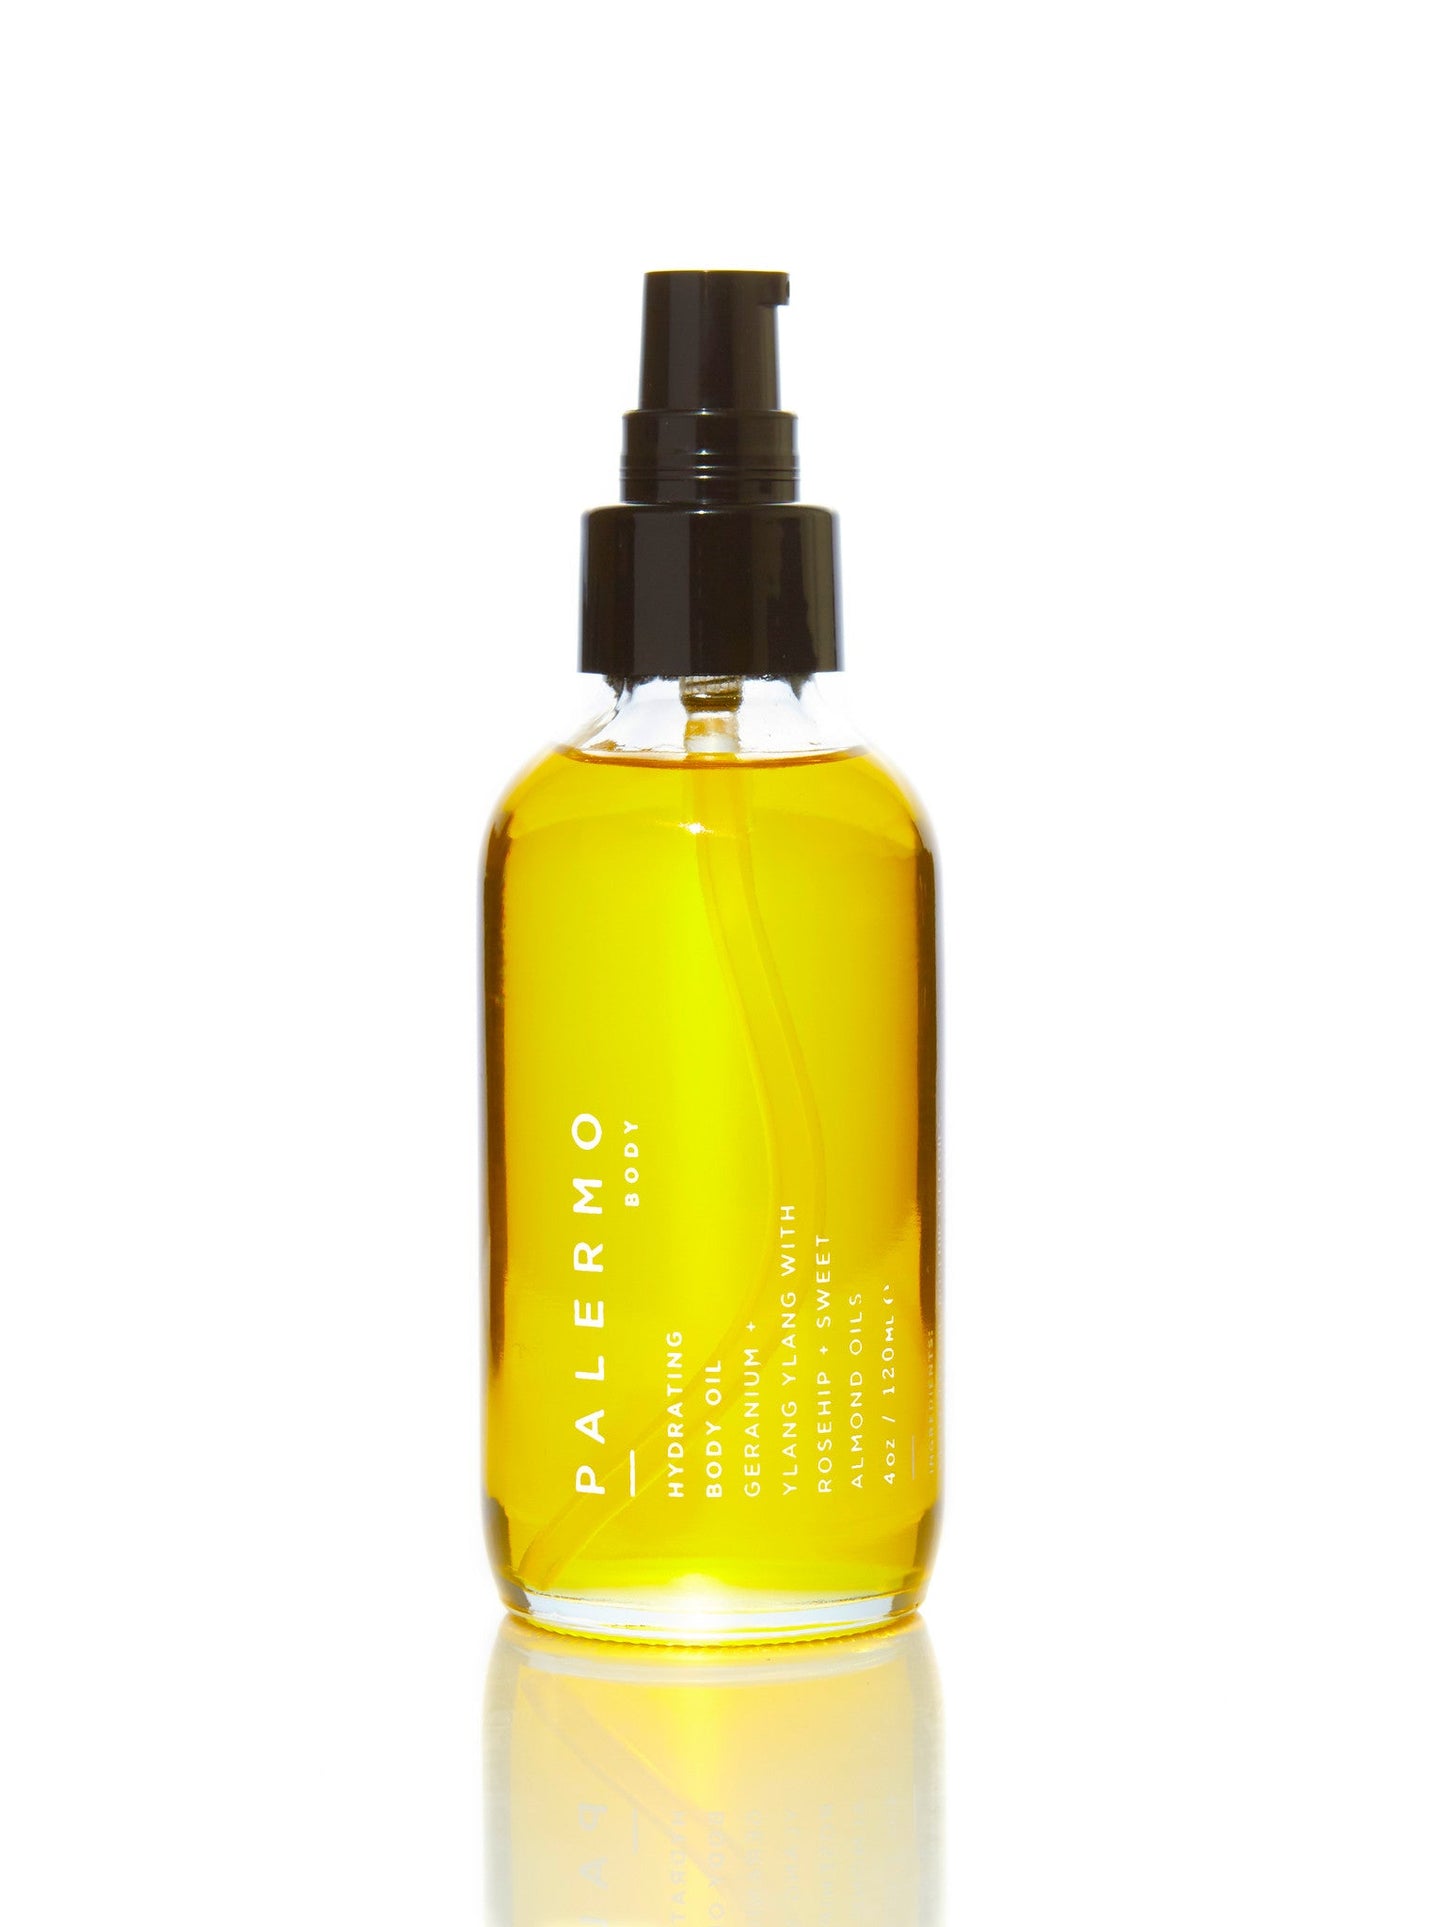 Hydrating Body Oil by Palermo Body - Lotus and Willow